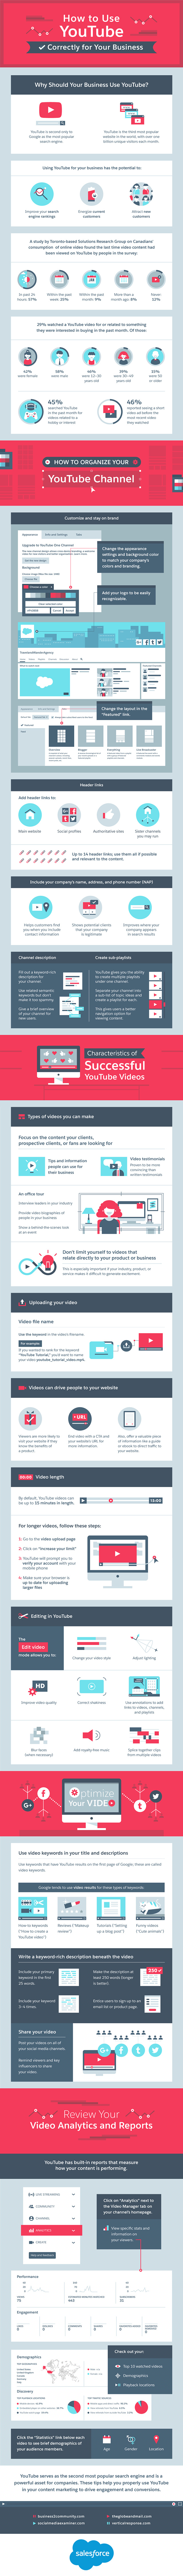 How to Use YouTube Correctly for Your Business